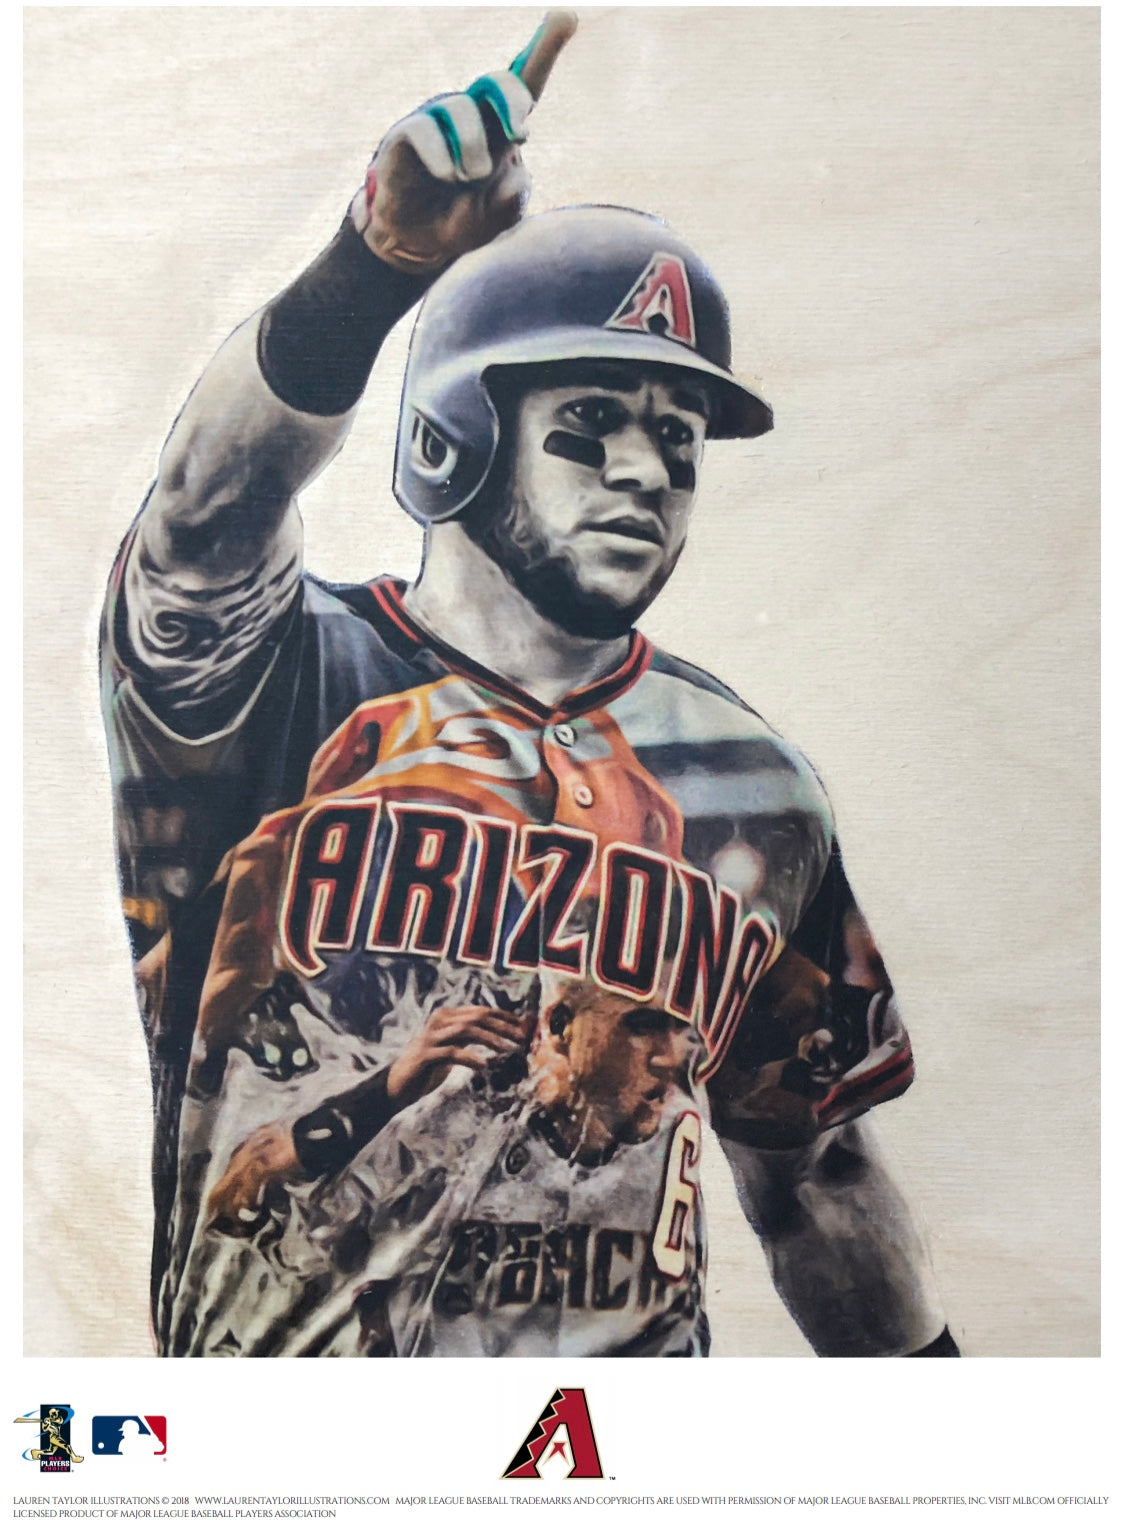 Peralta (David Peralta) - Officially Licensed MLB Print - Limited Release